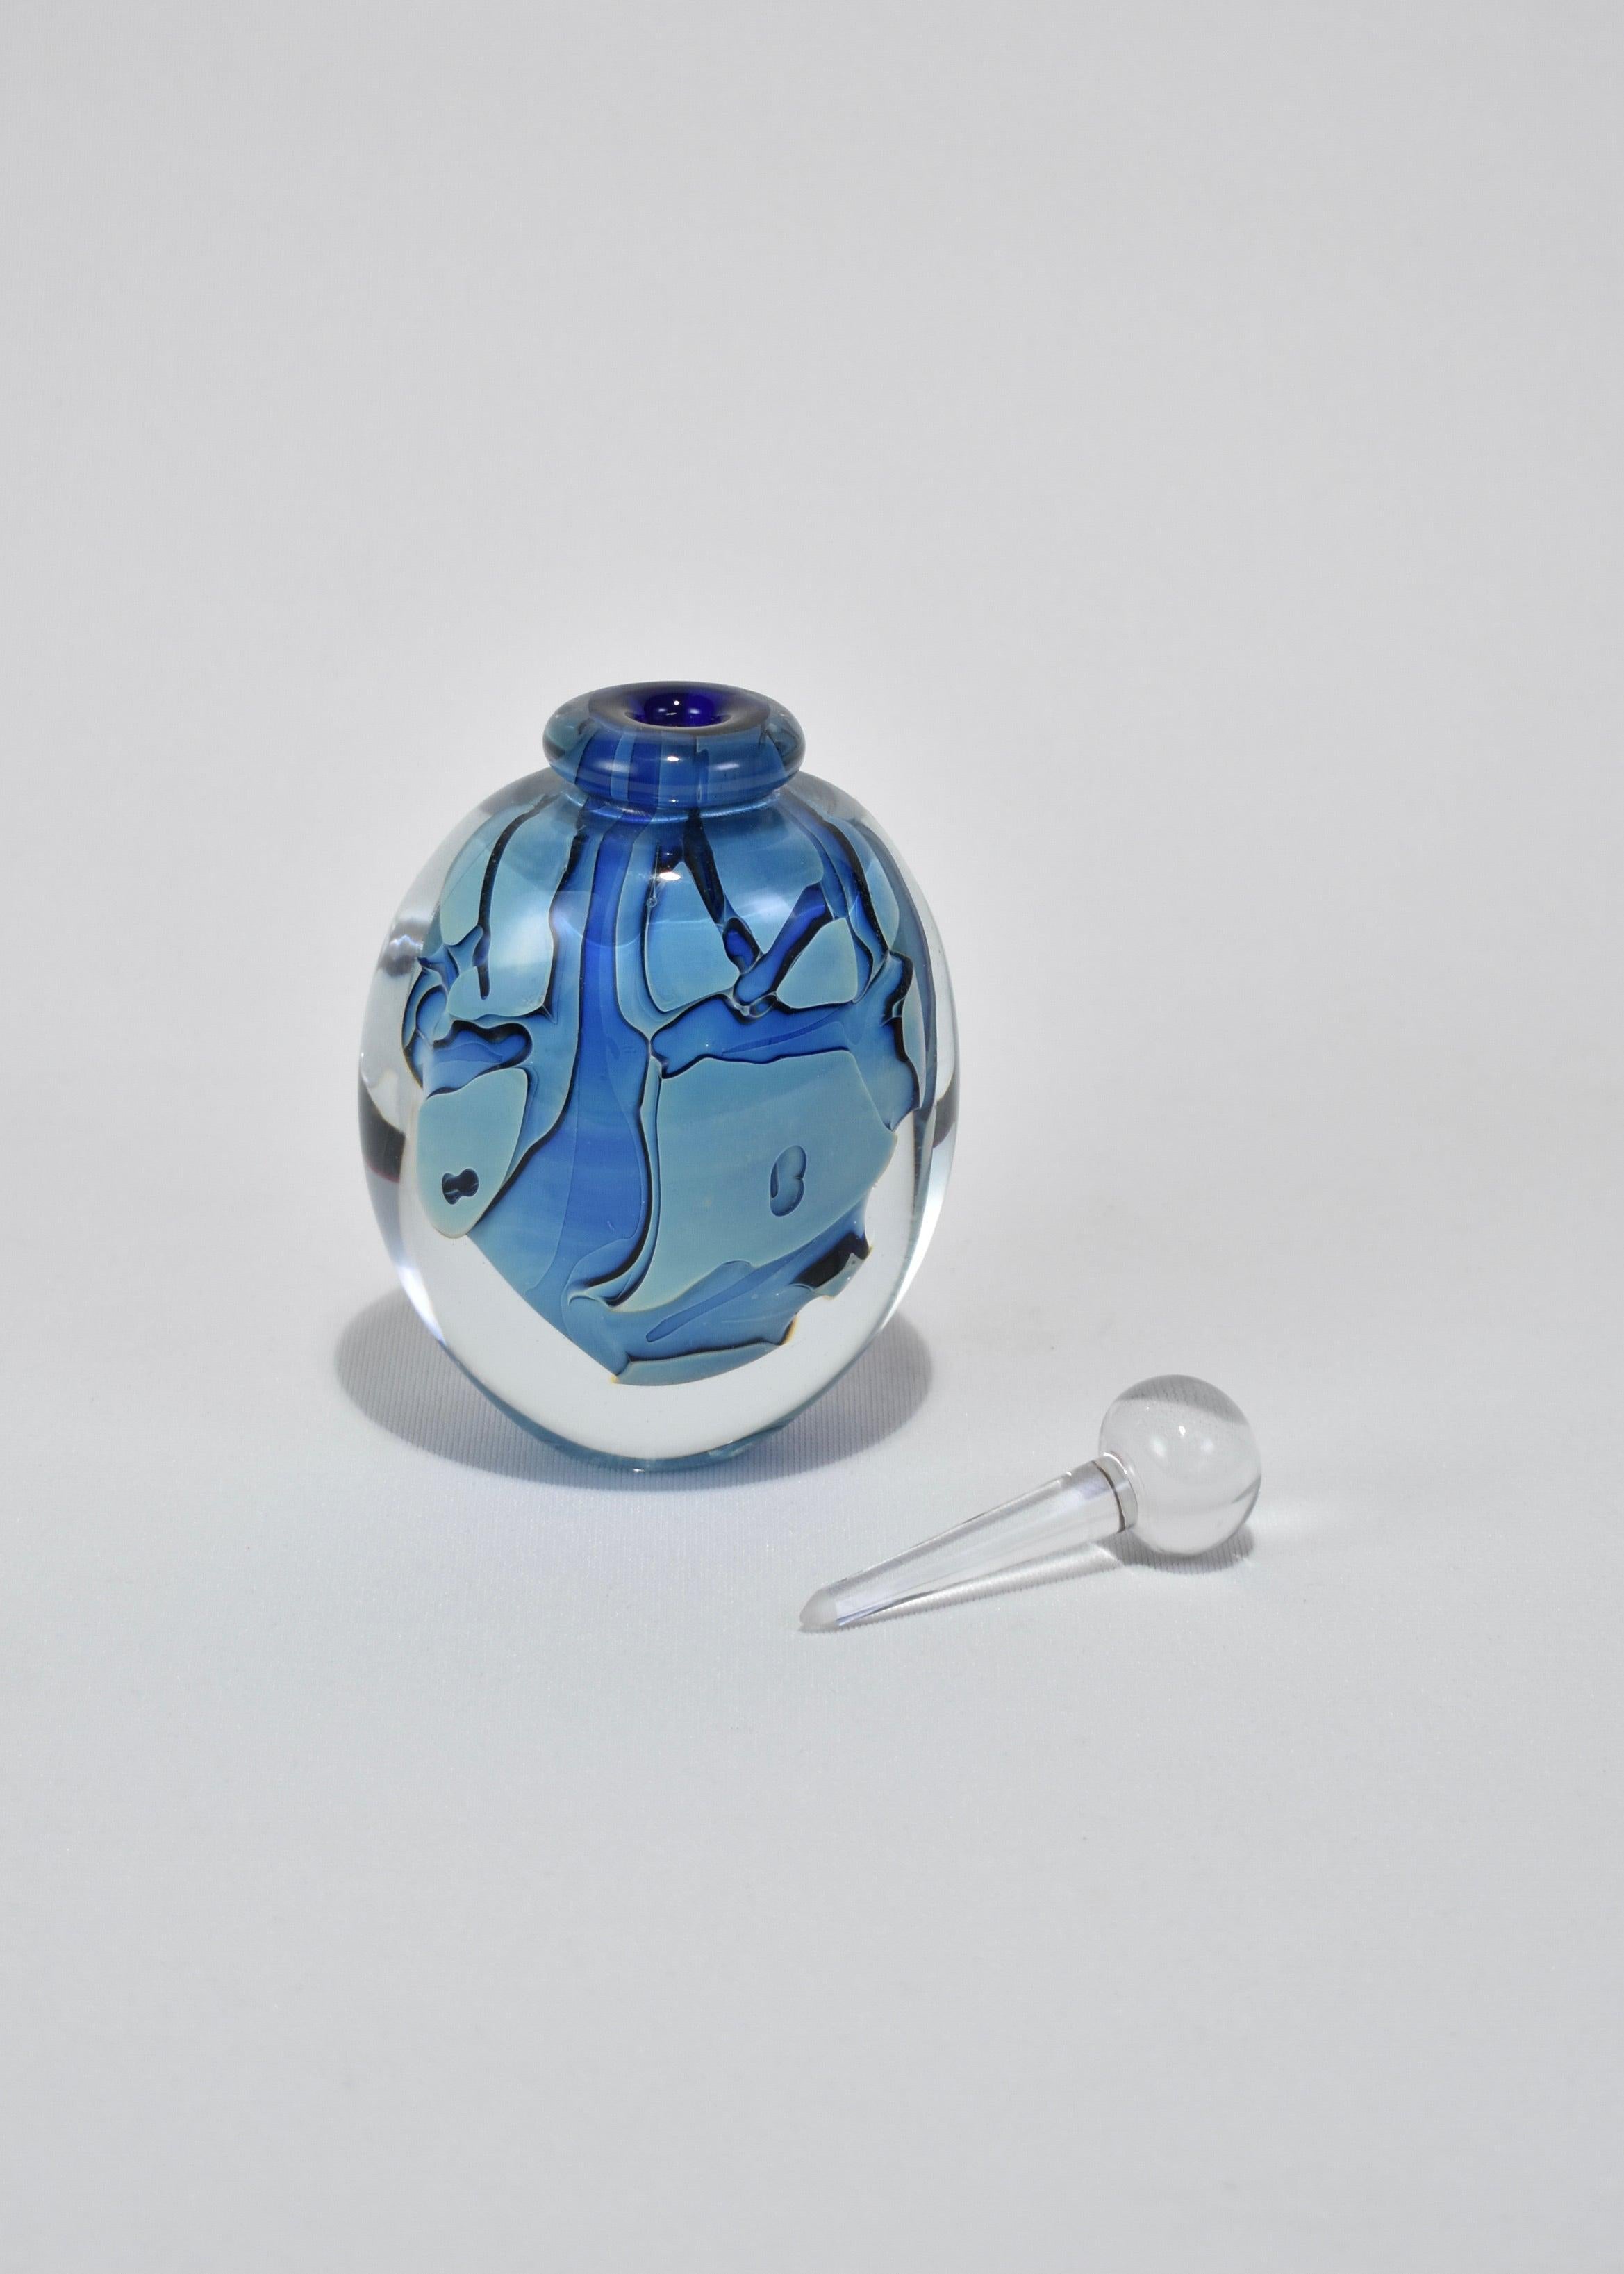 Beautiful vintage blown glass perfume bottle in blue with abstract design. Signed on base, Robert Eickholt.
 